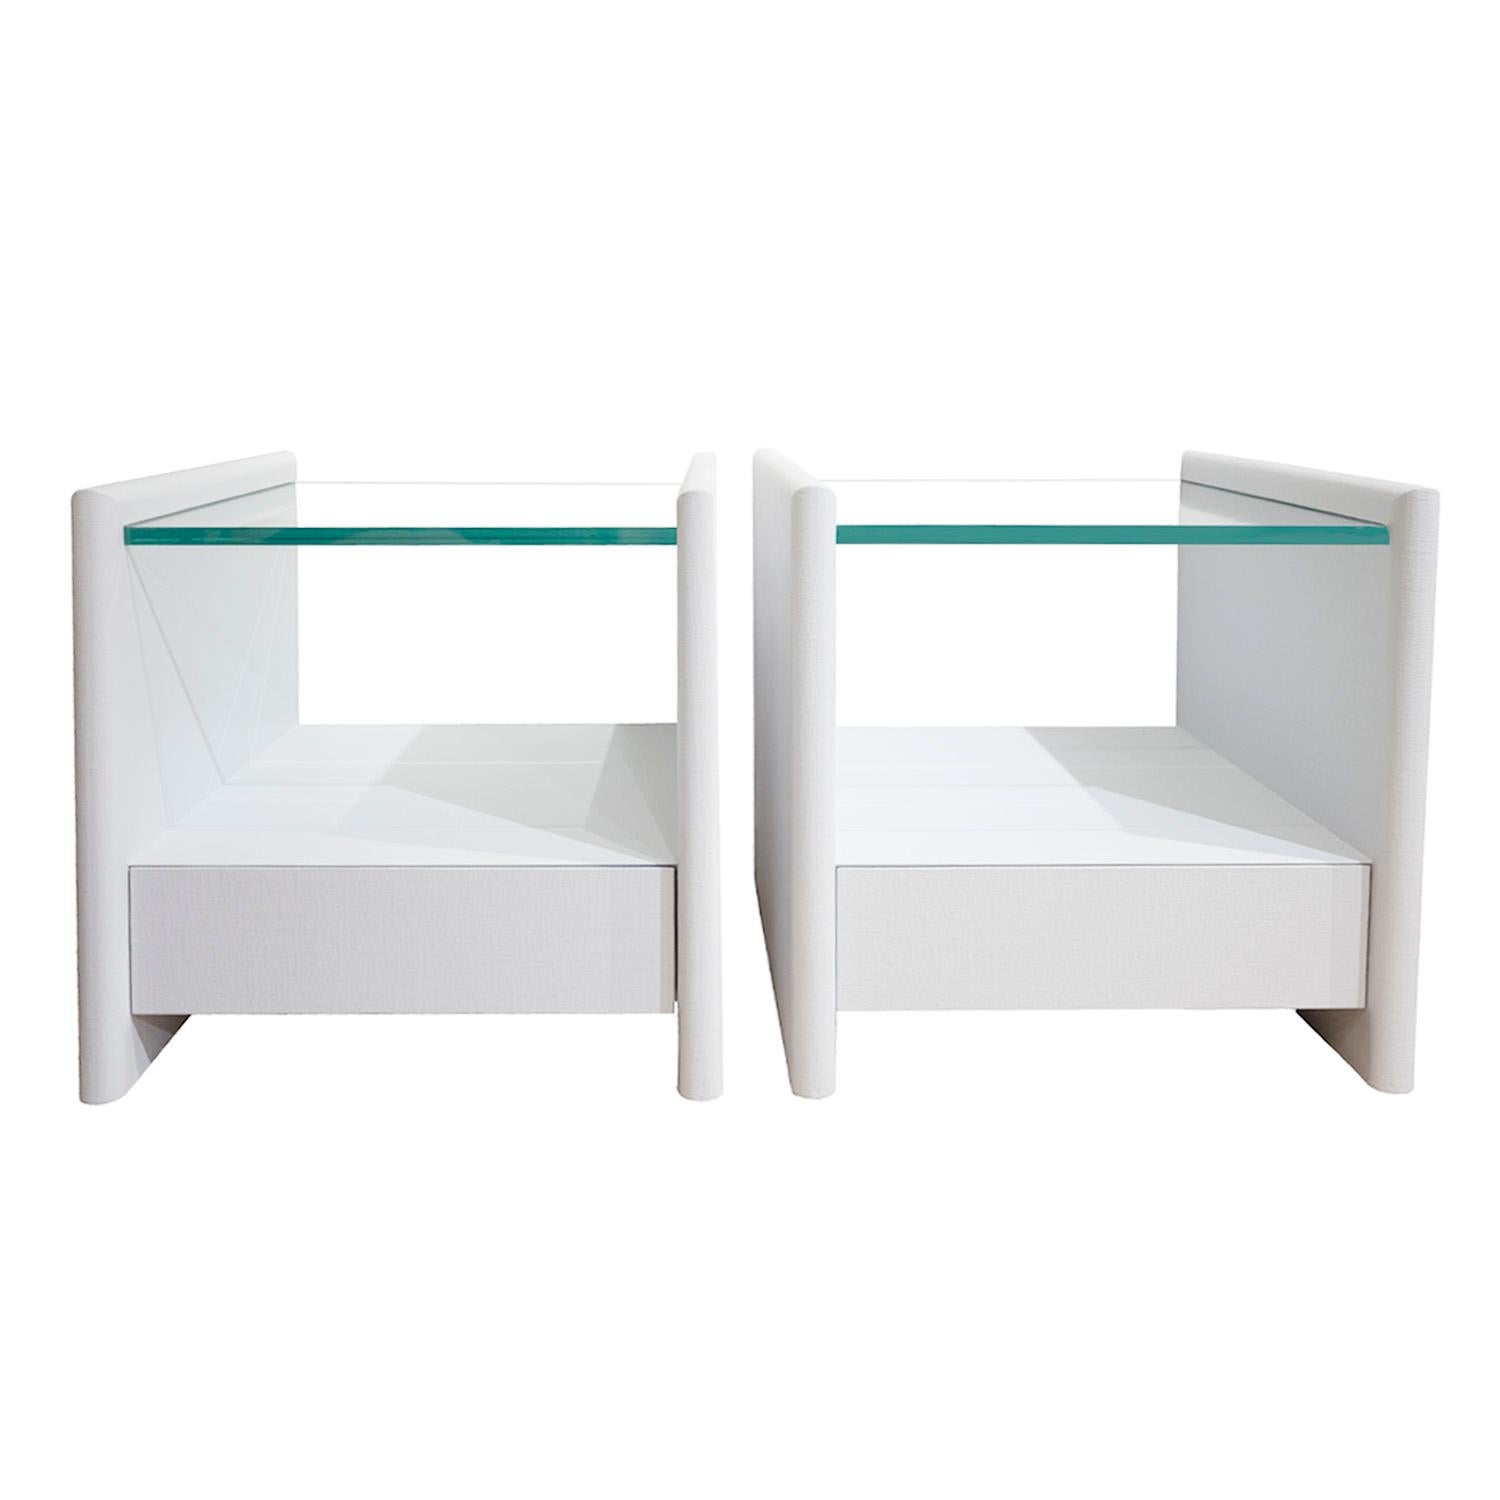 Pair beautifully made elegant bedside tables in gray lacquered linen with thick glass tops by Karl Springer, American 1980's. These have been newly relacquered by Lobel Modern.  A timeless design.